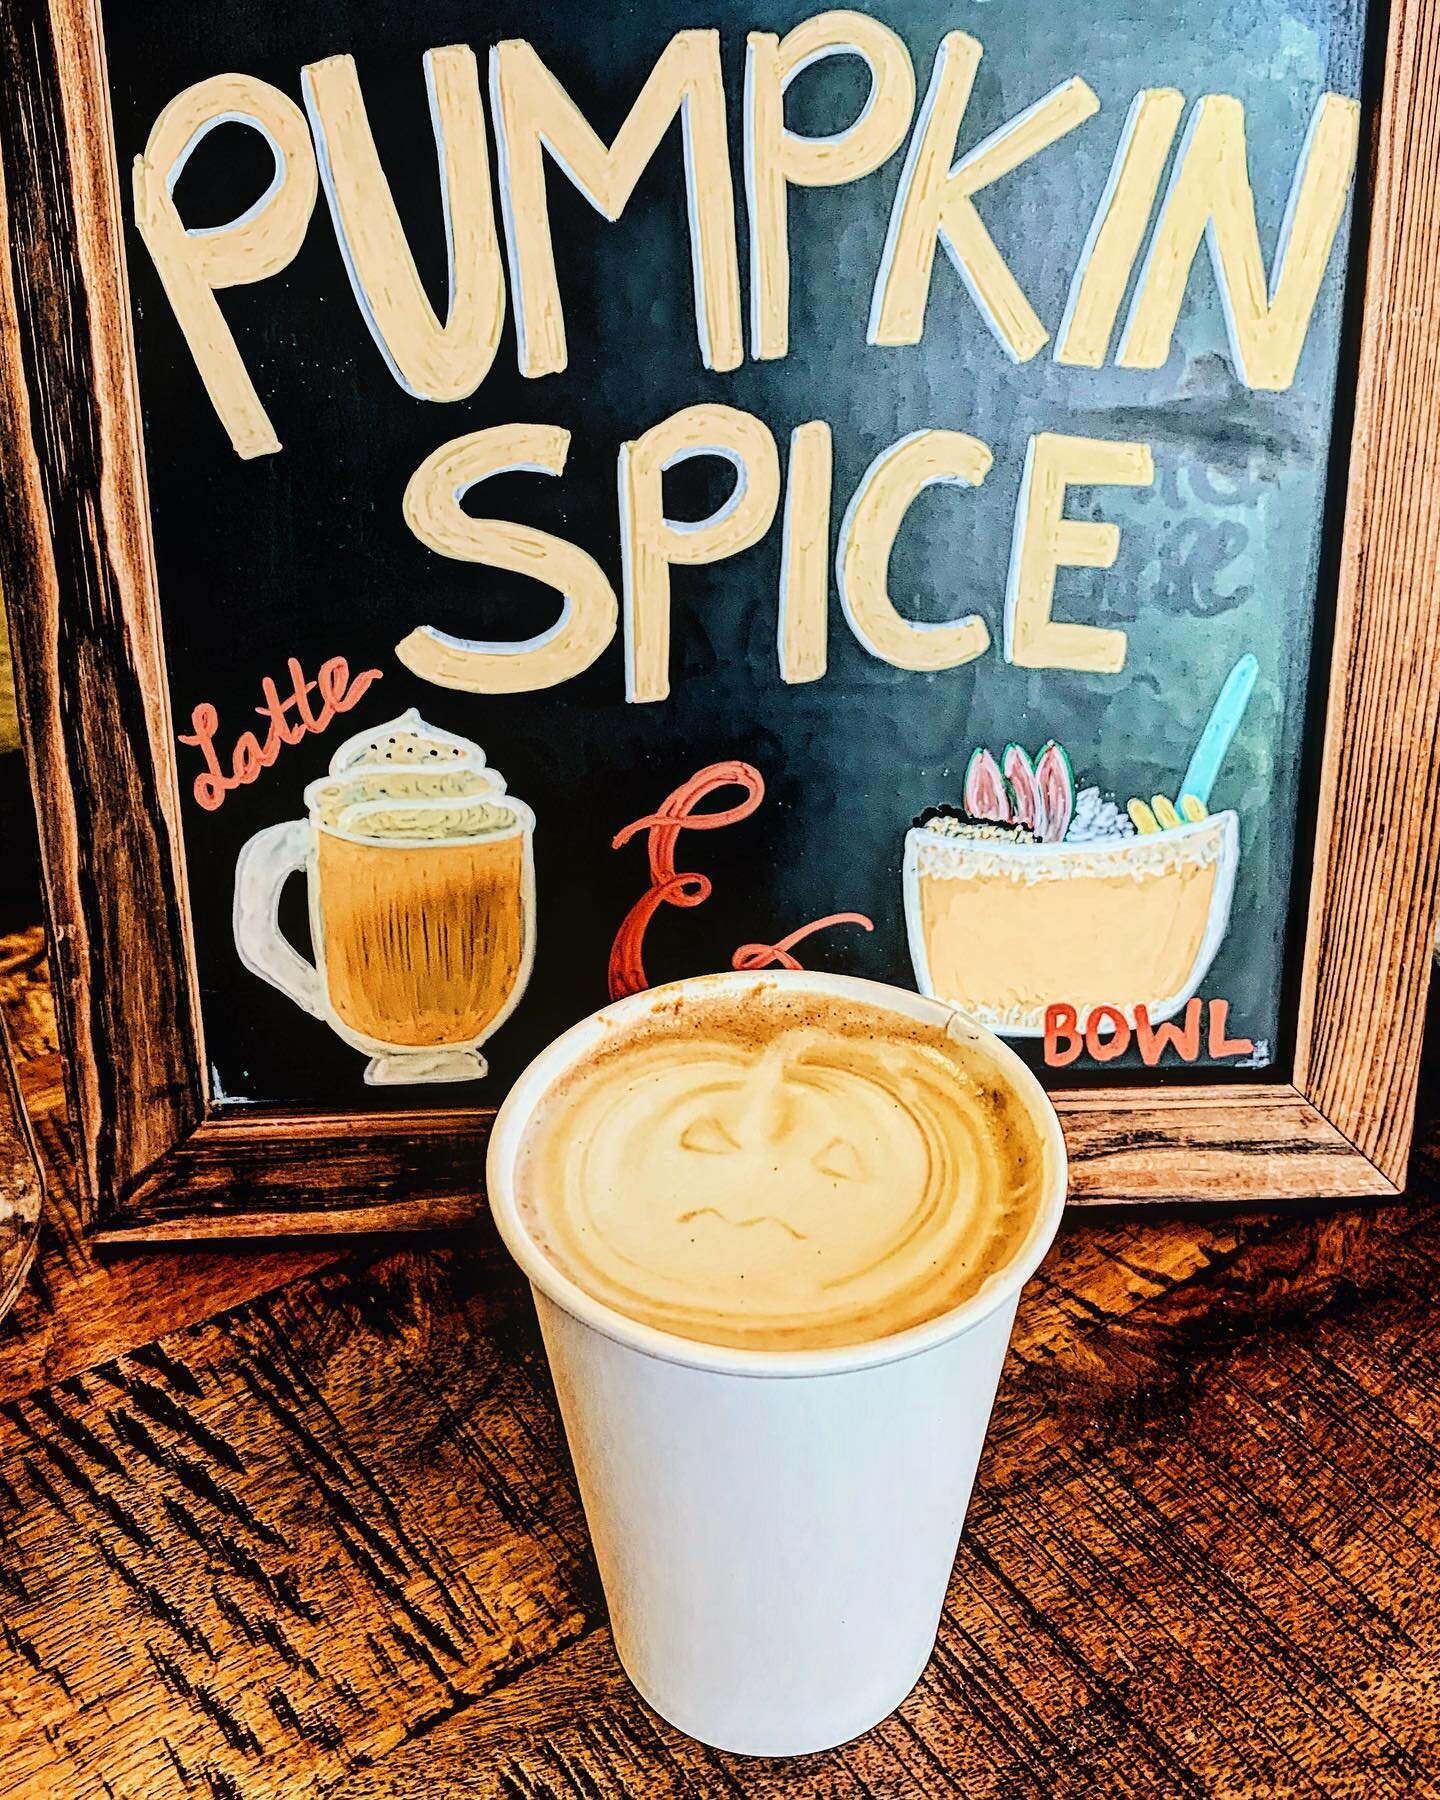 Now you get to choose: pumpkin spice latte... or pumpkin spice bowl! Both are all natural, made with real pumpkin, honey, and pumpkin pie spices! Hot or cold, your choice, or get them both!!!
.
.
.
#hightidemorrobay #pumpkin #pumpkinspice #pumpkinspi